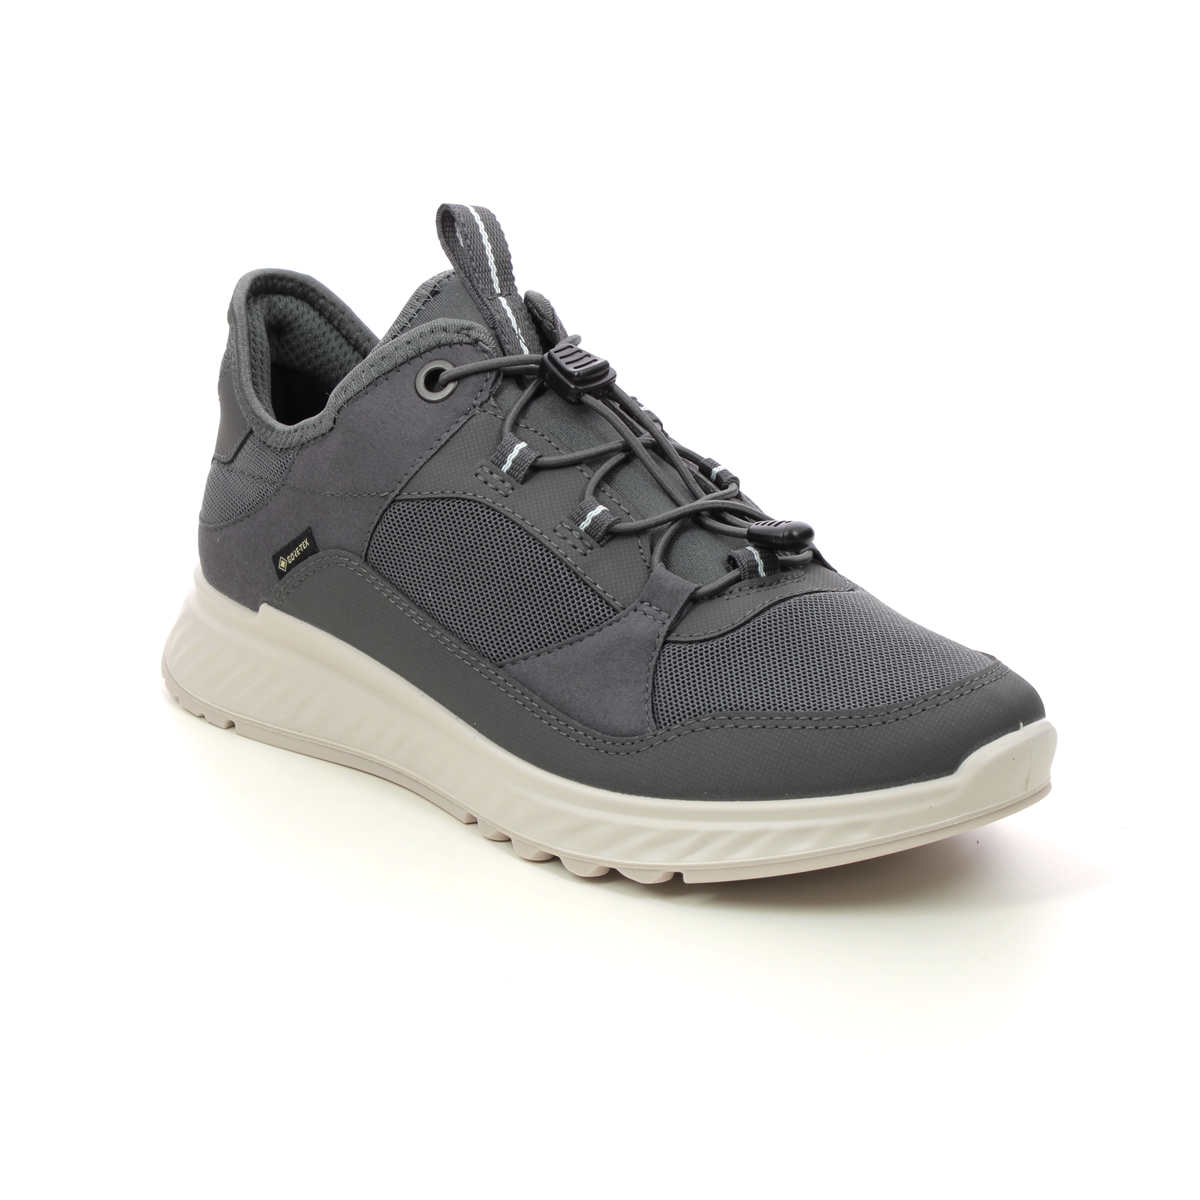 ECCO Exostride Gore Grey Womens Walking Shoes 835333-50869 in a Plain Leather and Textile in Size 41